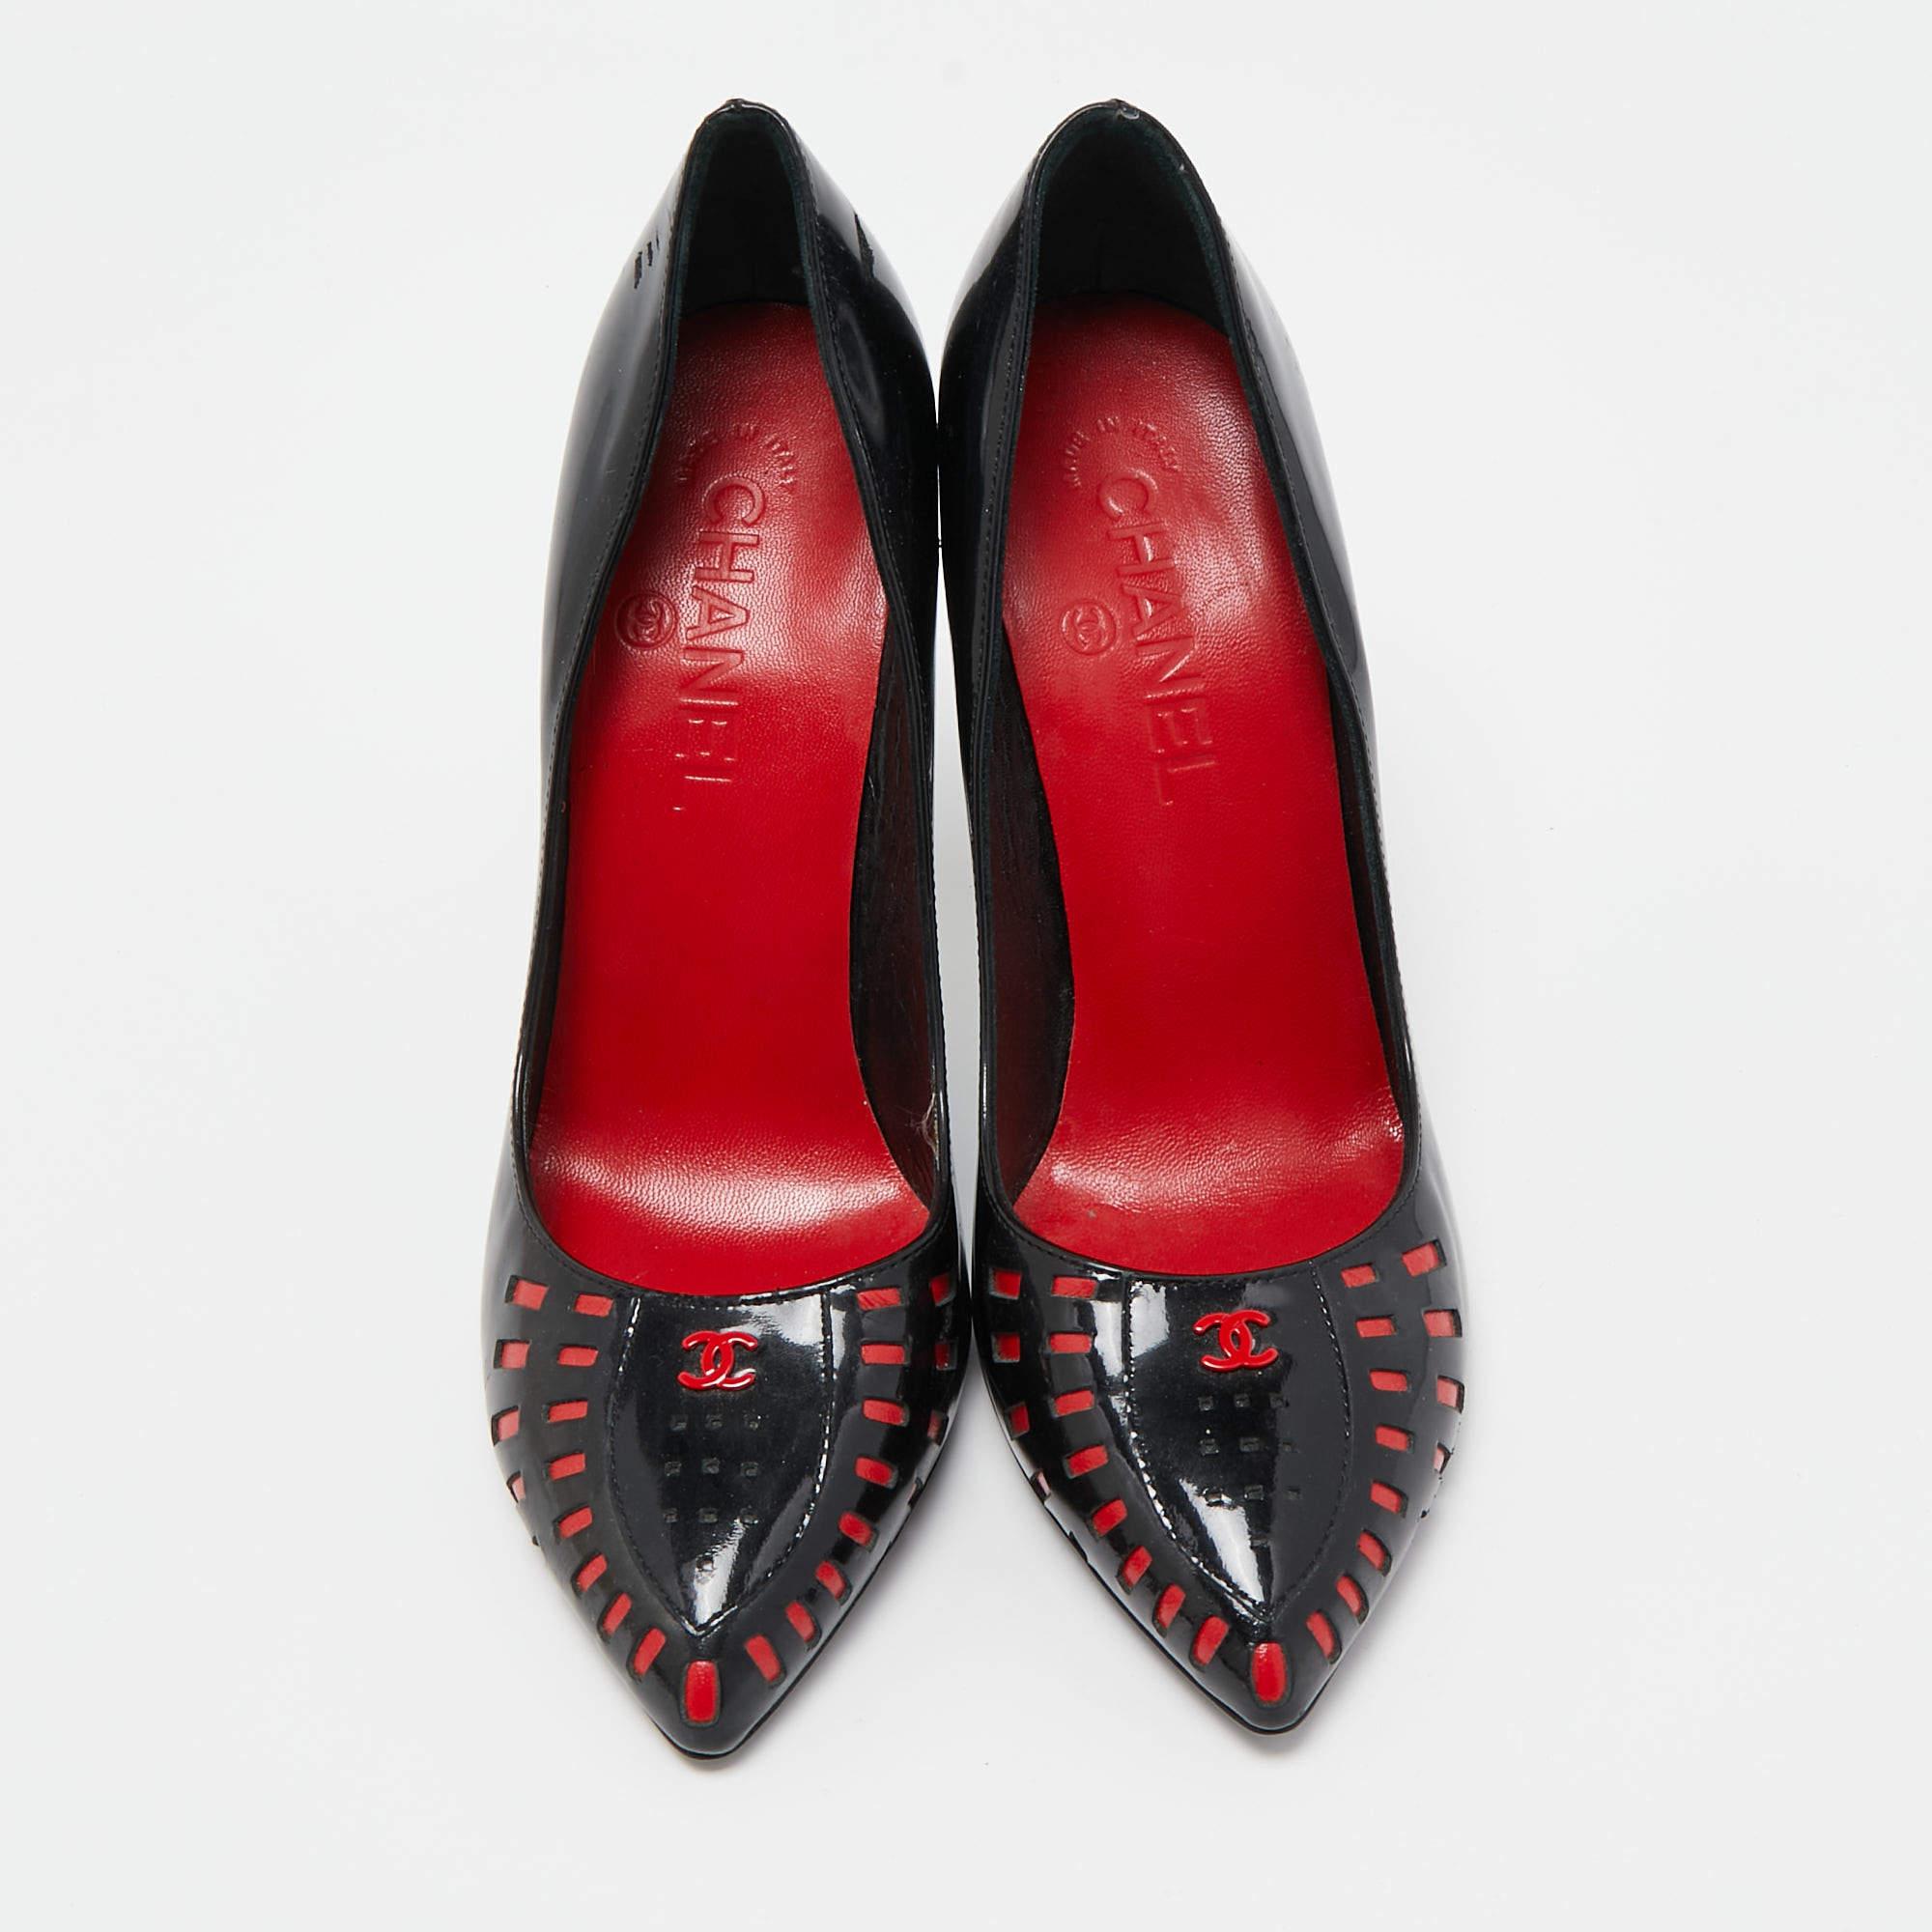 Women's Chanel Black/Red Patent Pointed Toe Pumps Size 38